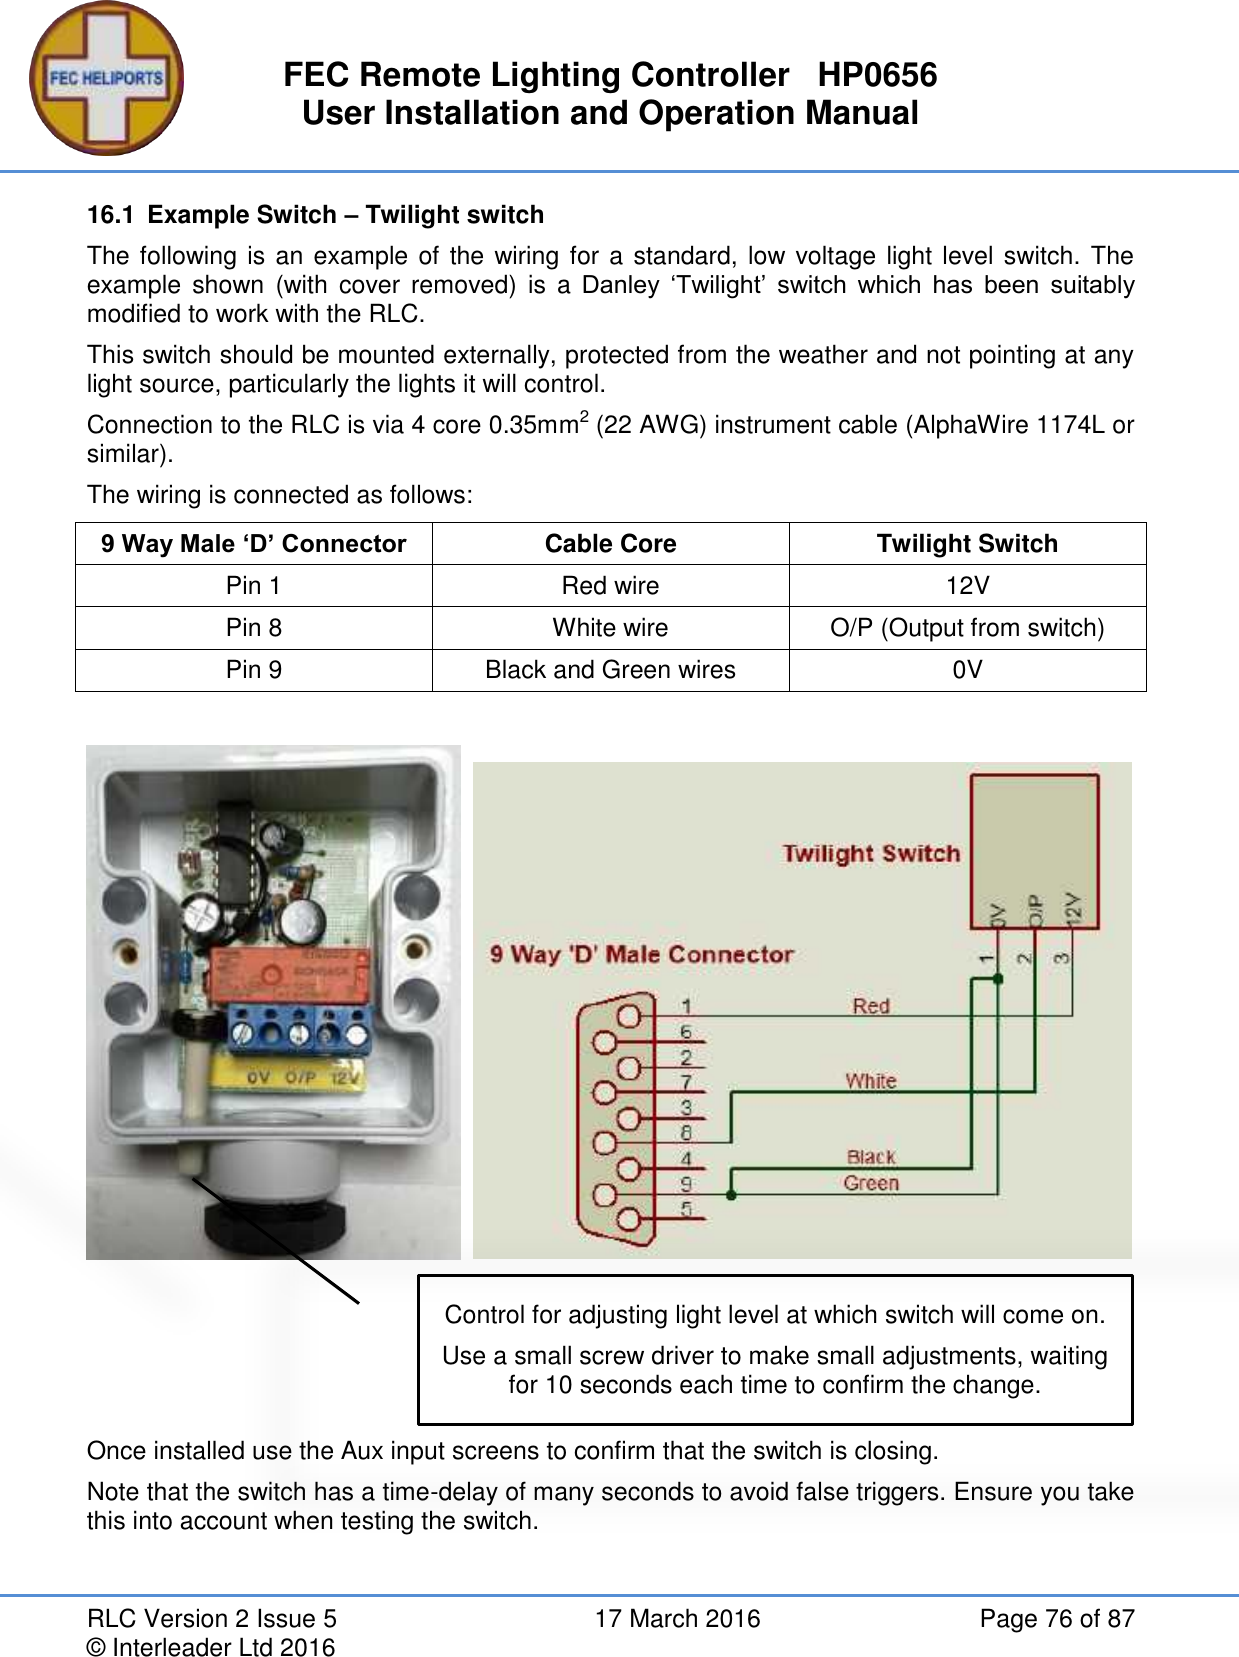 FEC Remote Lighting Controller   HP0656 User Installation and Operation Manual RLC Version 2 Issue 5  17 March 2016  Page 76 of 87 © Interleader Ltd 2016 16.1  Example Switch – Twilight switch The following is an example of the wiring for a standard, low voltage light level switch. The example  shown  (with  cover  removed)  is  a Danley  ‘Twilight’  switch  which  has  been  suitably modified to work with the RLC. This switch should be mounted externally, protected from the weather and not pointing at any light source, particularly the lights it will control. Connection to the RLC is via 4 core 0.35mm2 (22 AWG) instrument cable (AlphaWire 1174L or similar). The wiring is connected as follows: 9 Way Male ‘D’ Connector Cable Core Twilight Switch Pin 1 Red wire 12V Pin 8 White wire O/P (Output from switch) Pin 9 Black and Green wires 0V          Once installed use the Aux input screens to confirm that the switch is closing. Note that the switch has a time-delay of many seconds to avoid false triggers. Ensure you take this into account when testing the switch.   Control for adjusting light level at which switch will come on. Use a small screw driver to make small adjustments, waiting for 10 seconds each time to confirm the change. 